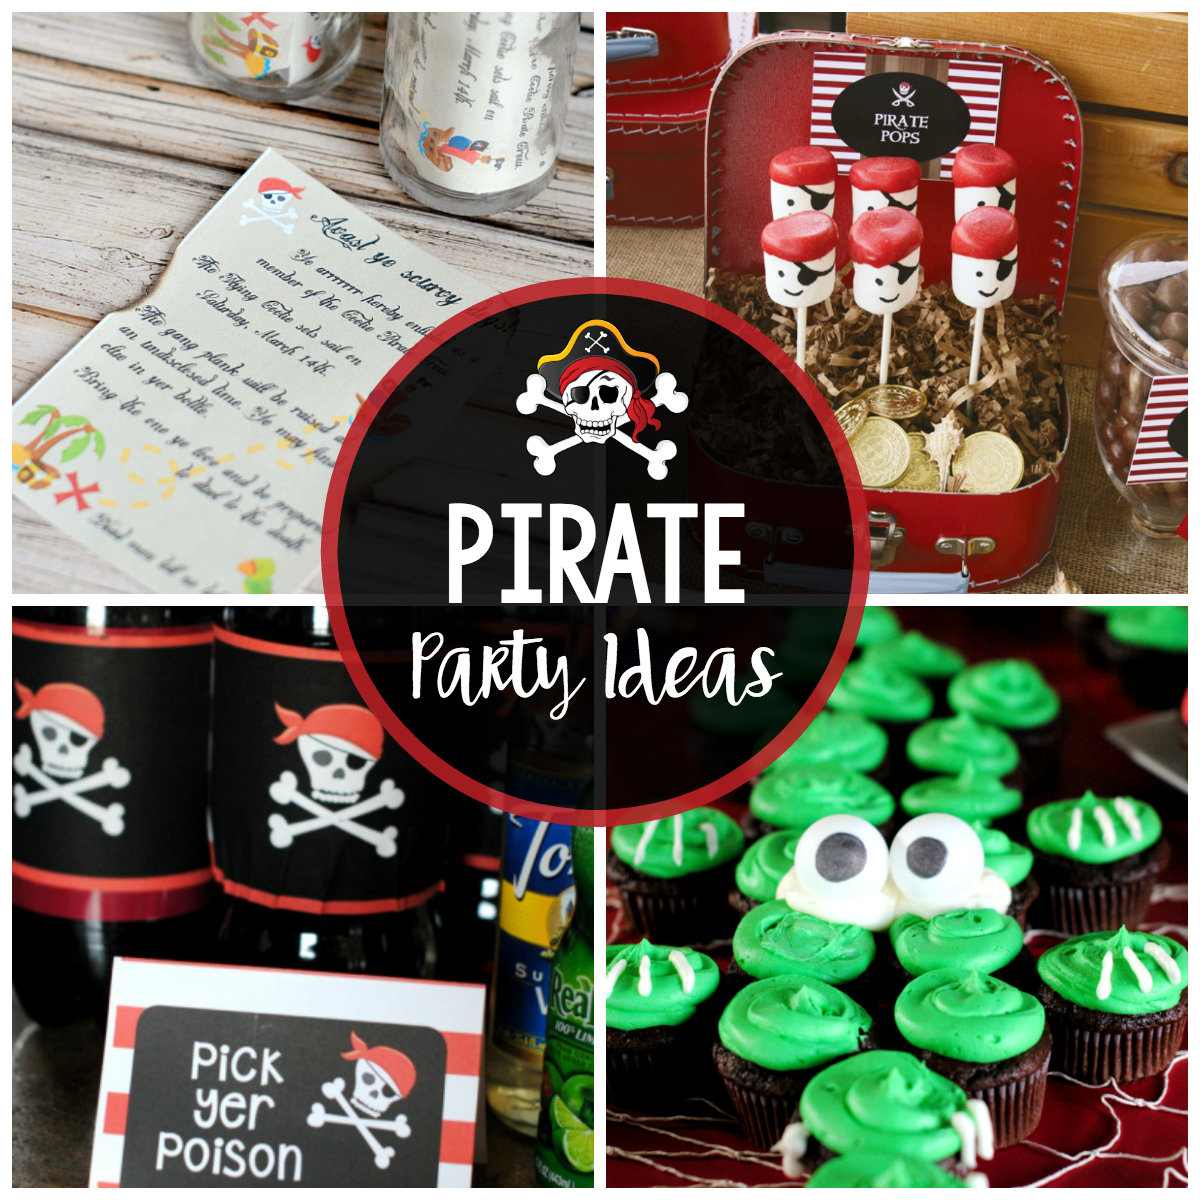 Fun Pirate Party Ideas-Invitations, Decorations, Food, & Games